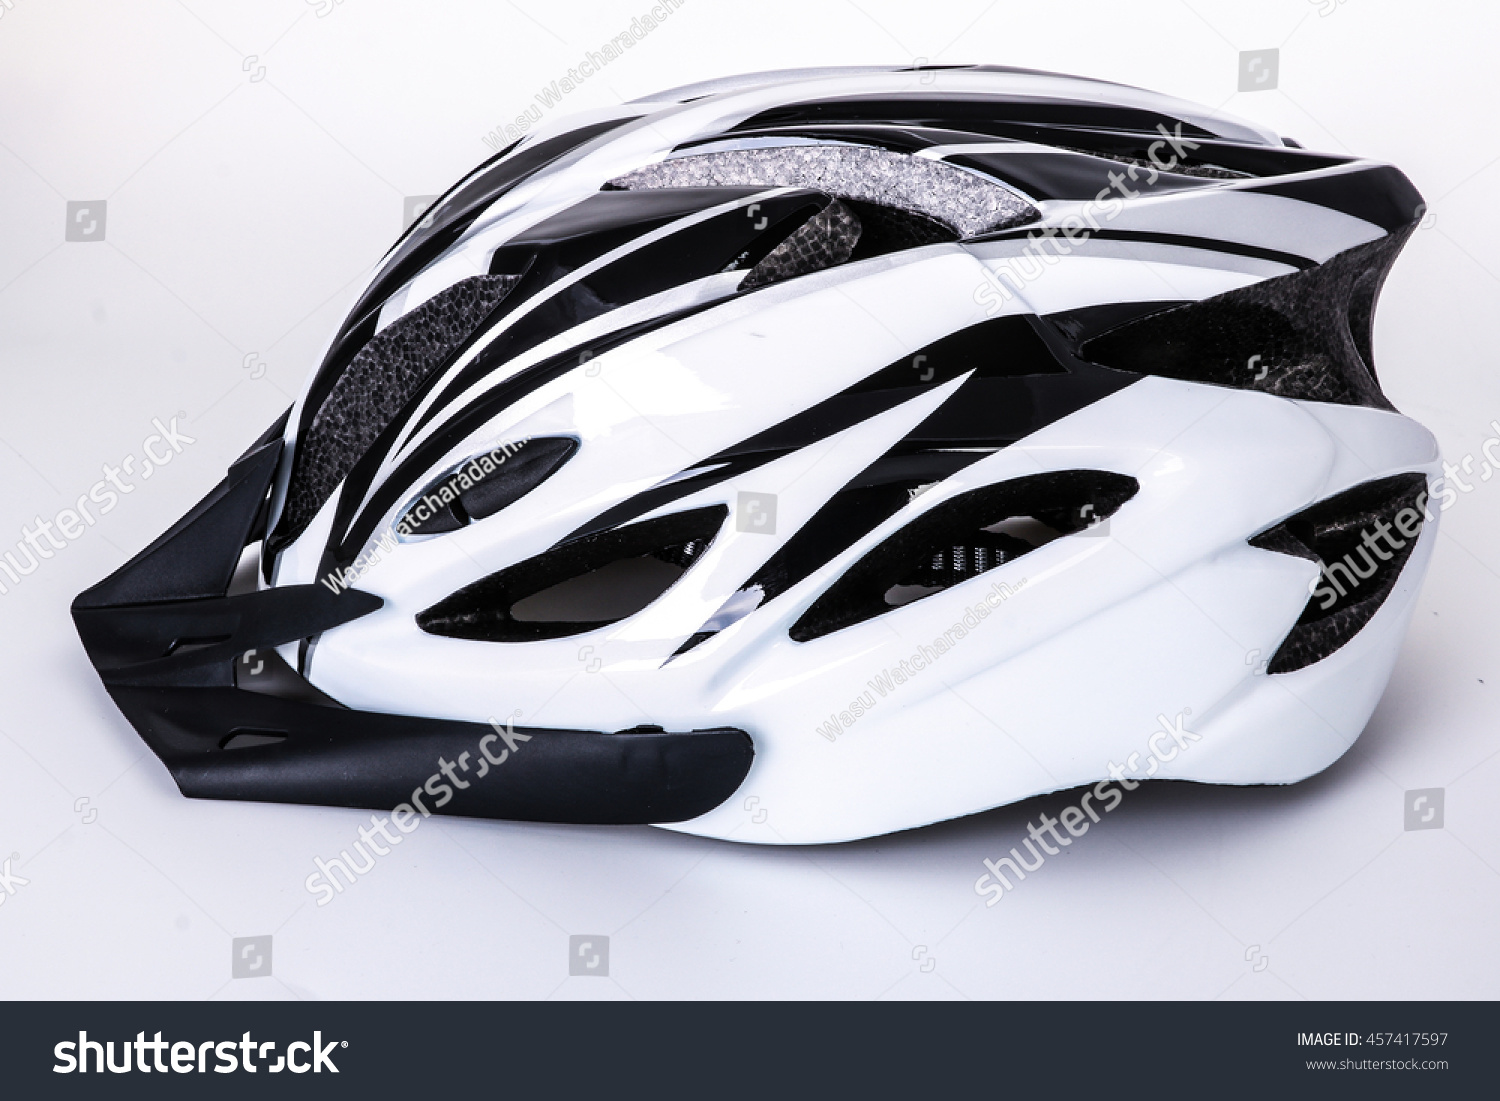 Bicycle helmet isolated on white background #457417597